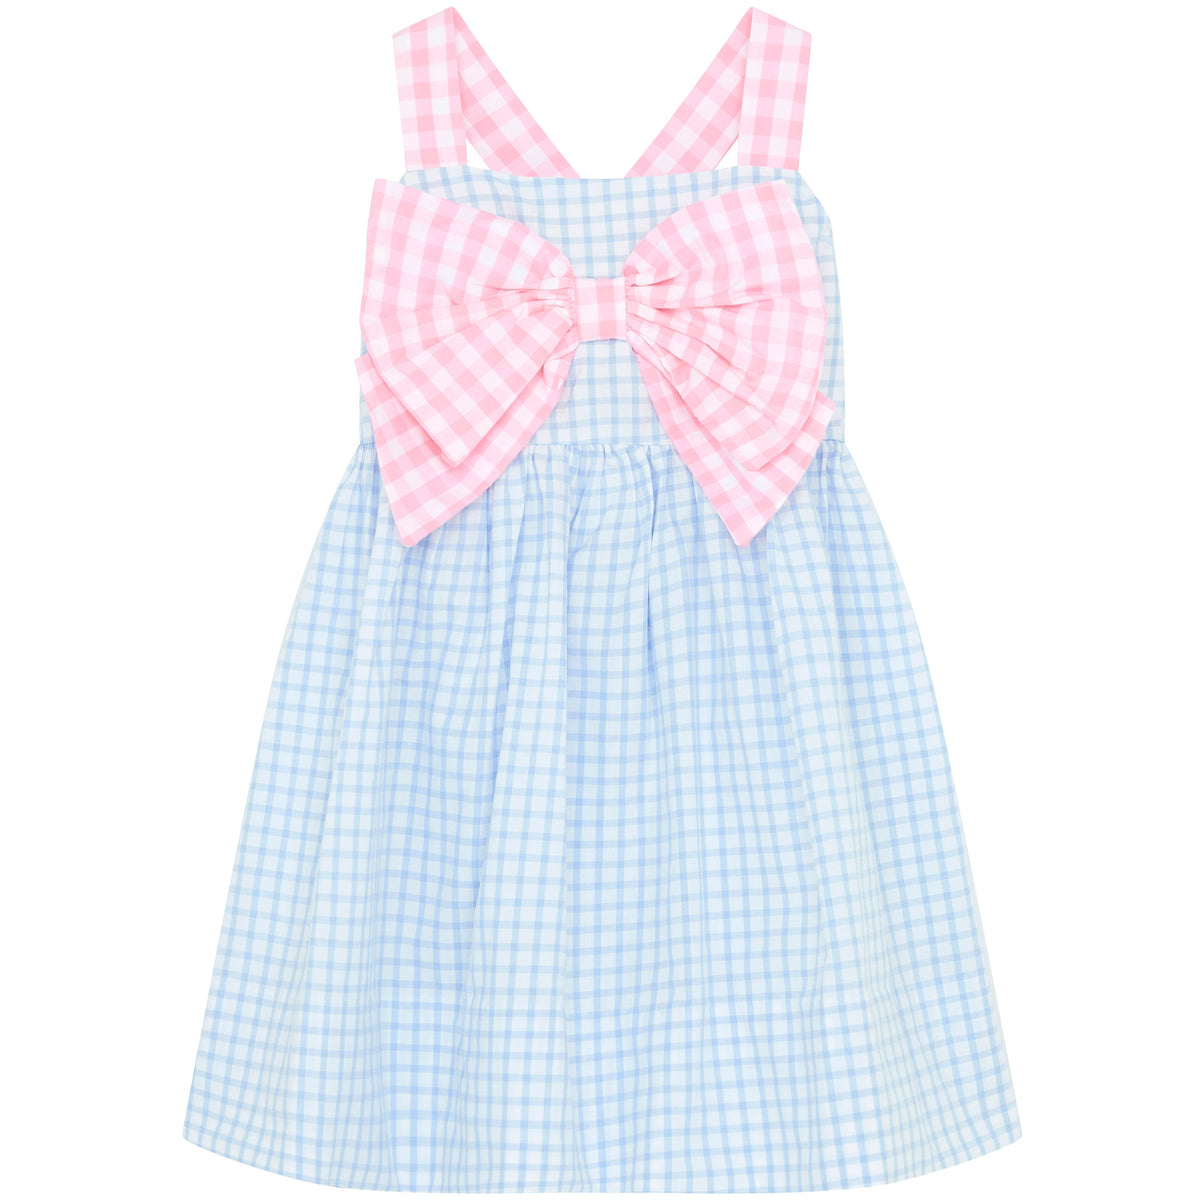 Little Princess Helena Gingham Bow Cotton Baby Dress Pink Blue | Holly Hastie London